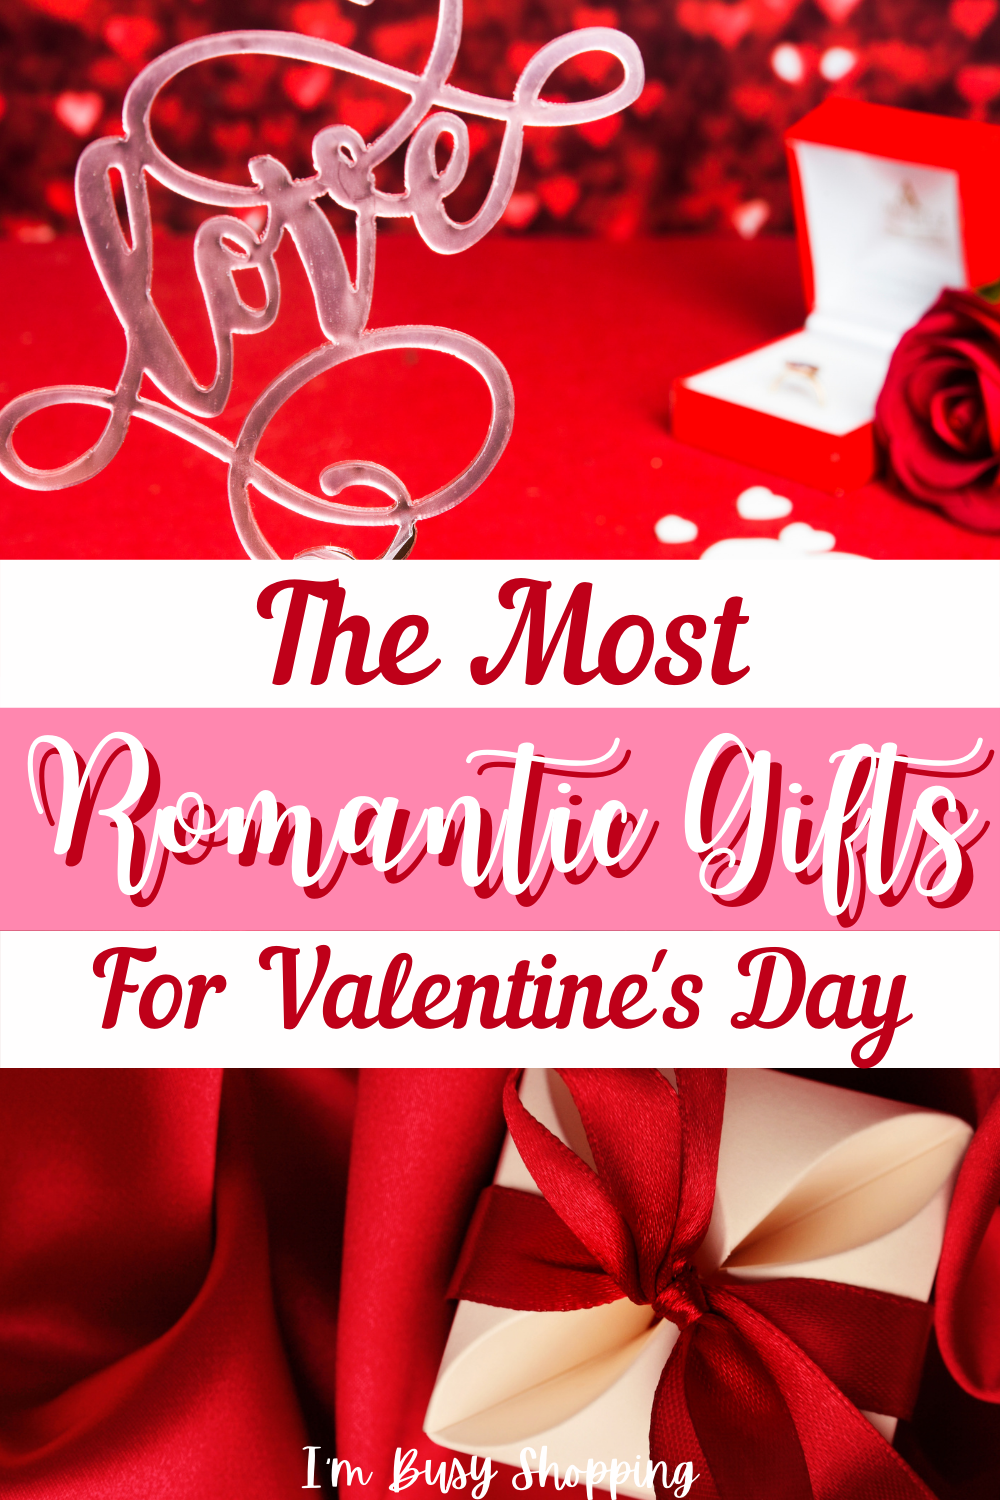 Pin showing Romantic Gifts for Valentine's Day